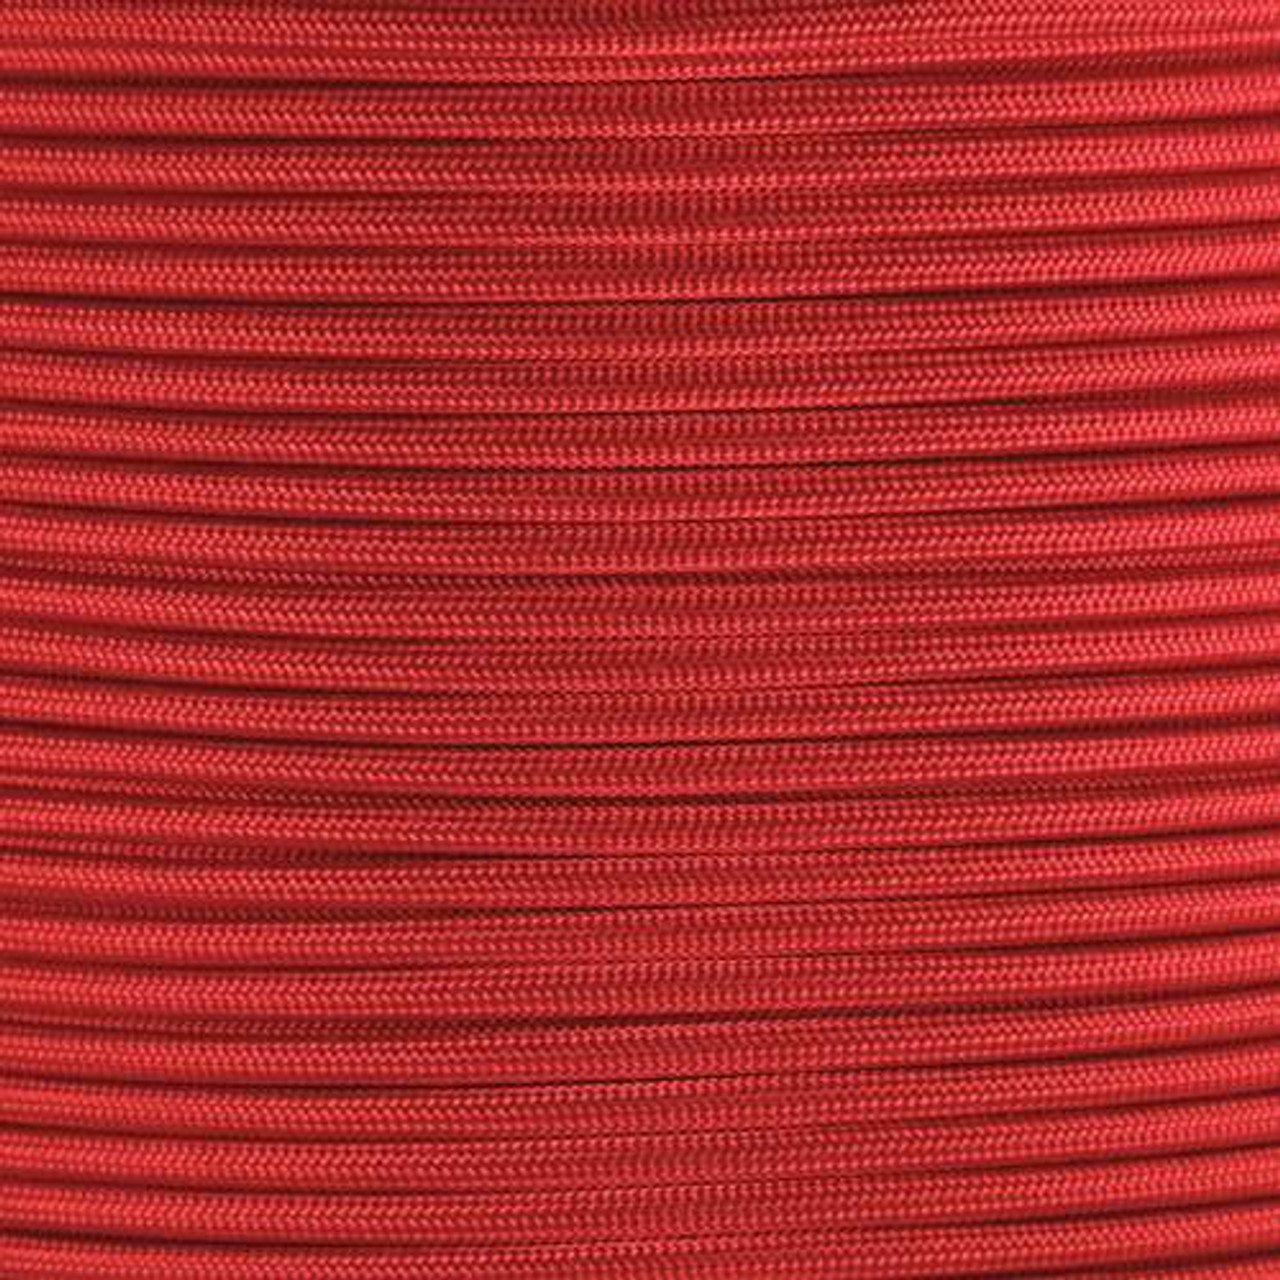 Imperial Red 750 Paracord (11-Strand) - Spools